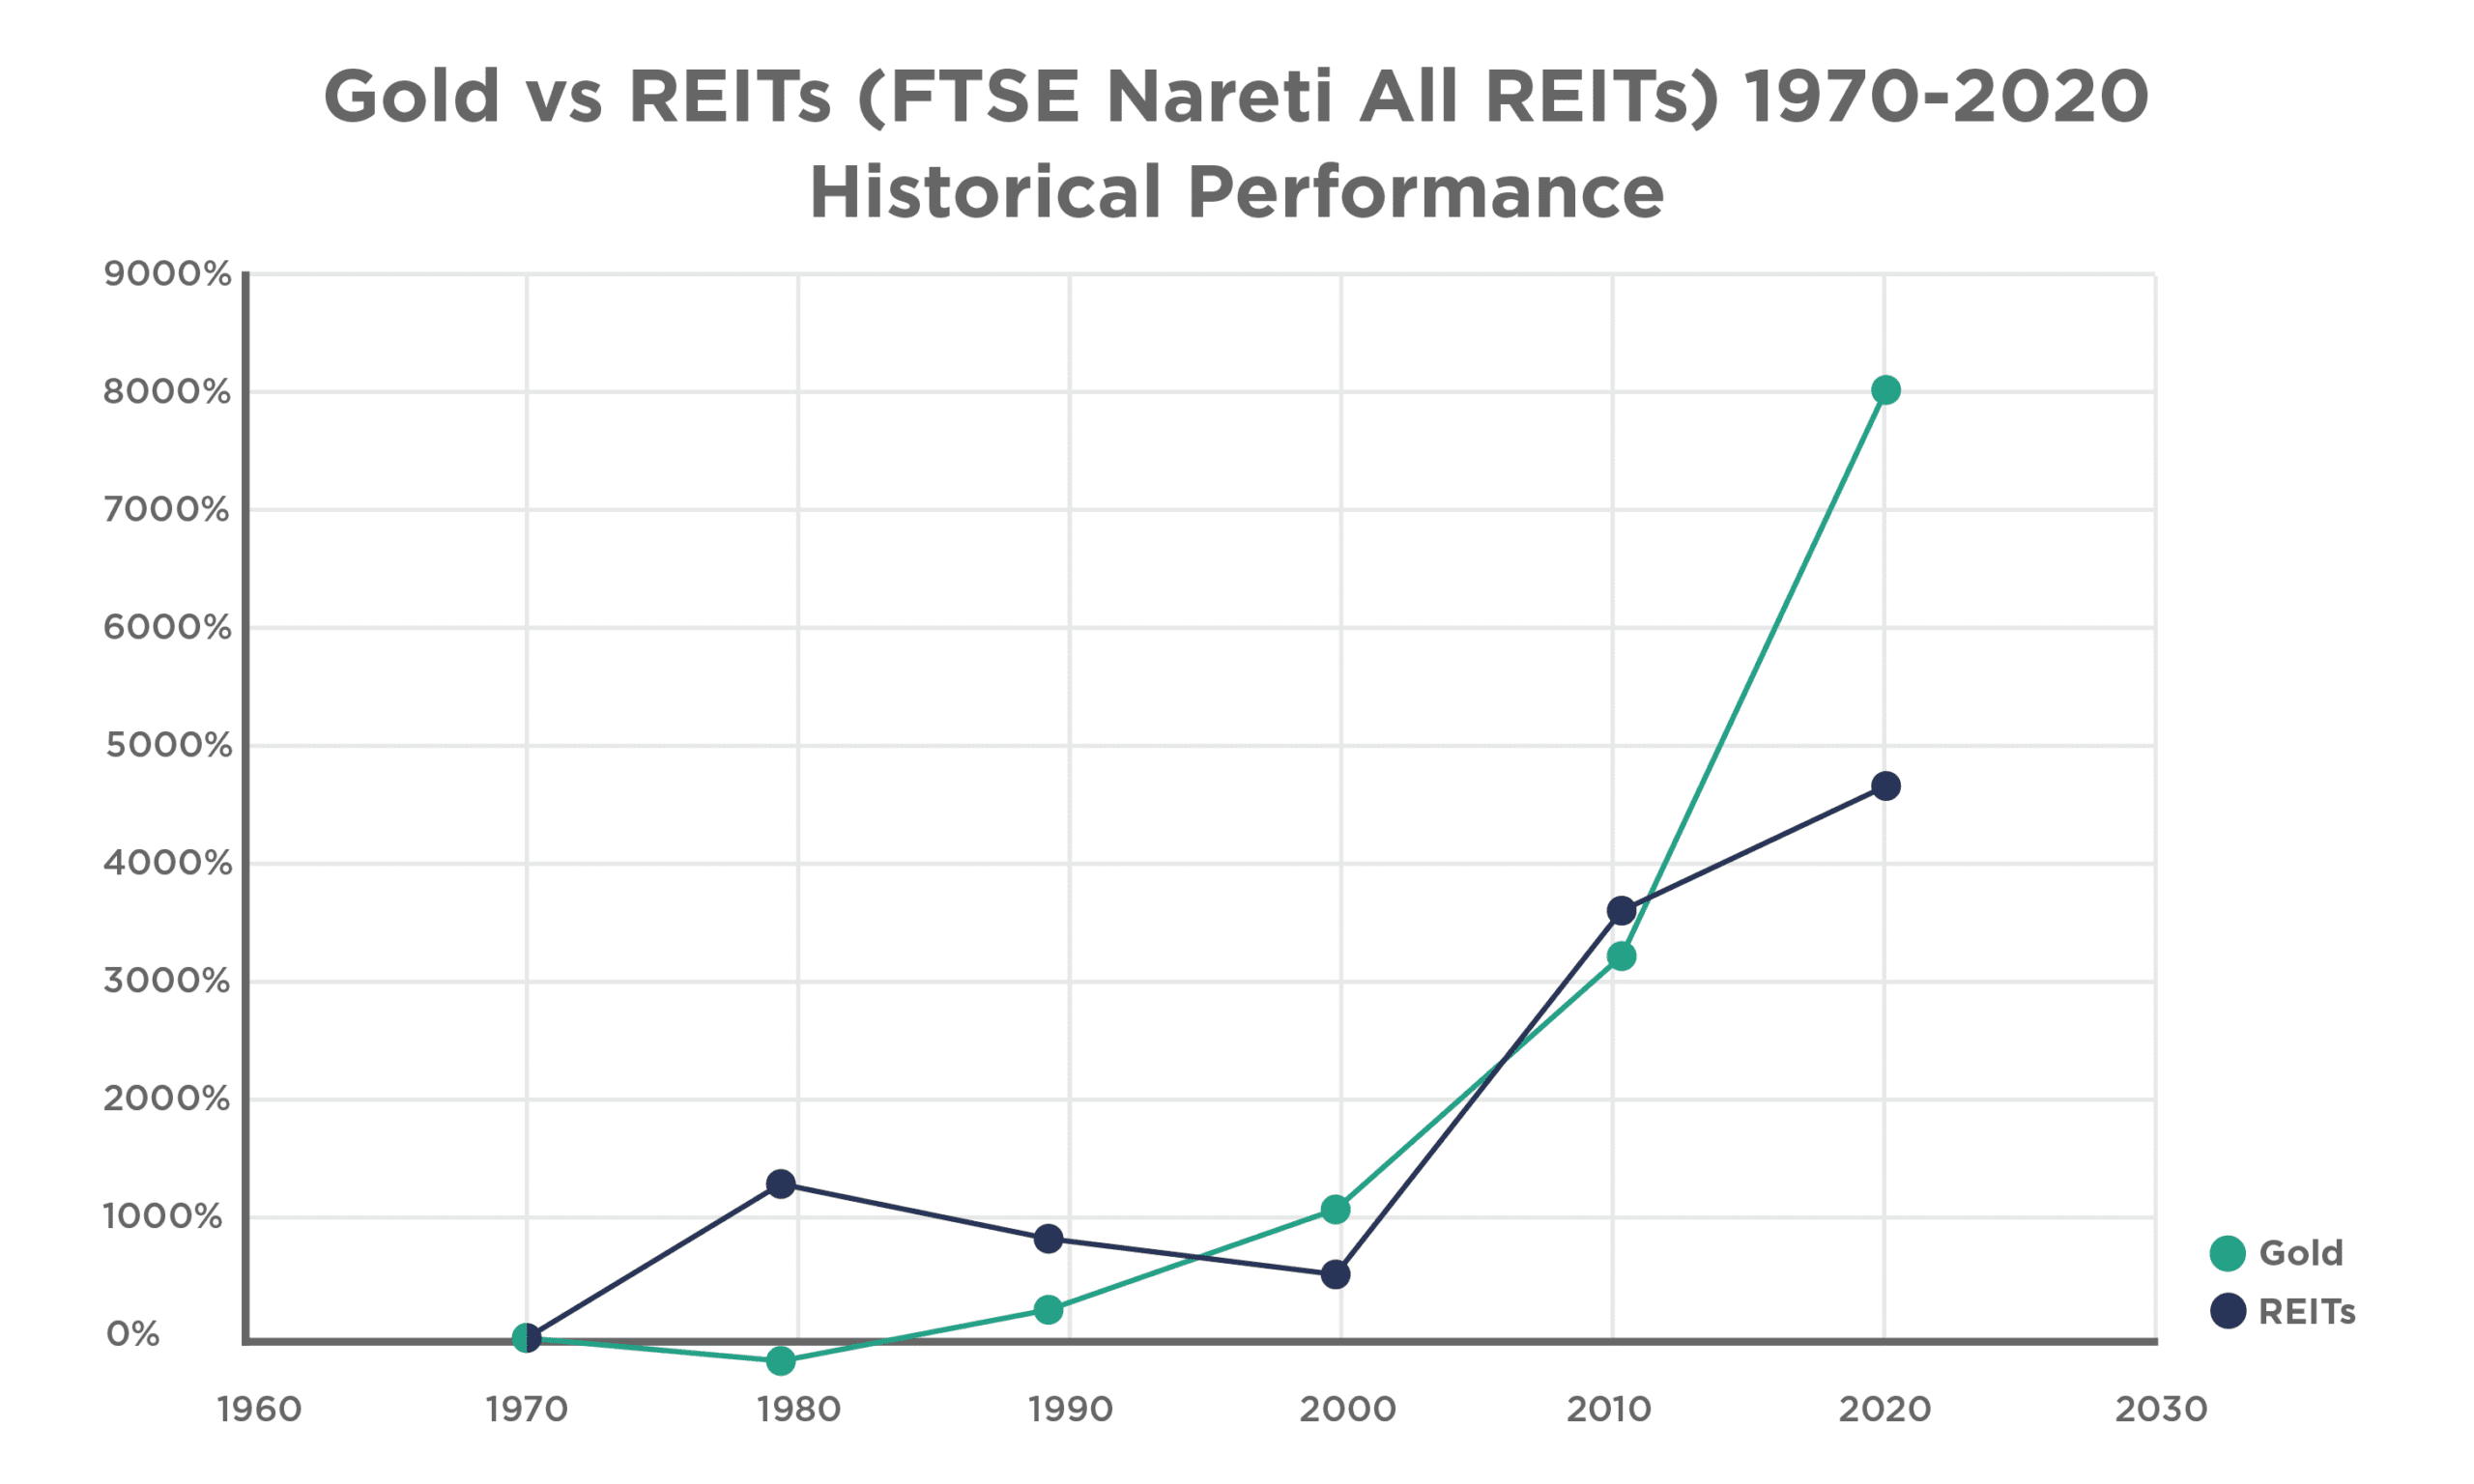 This chart compares the overall historical performances of gold and real estate investment trusts (REITs) since 1970